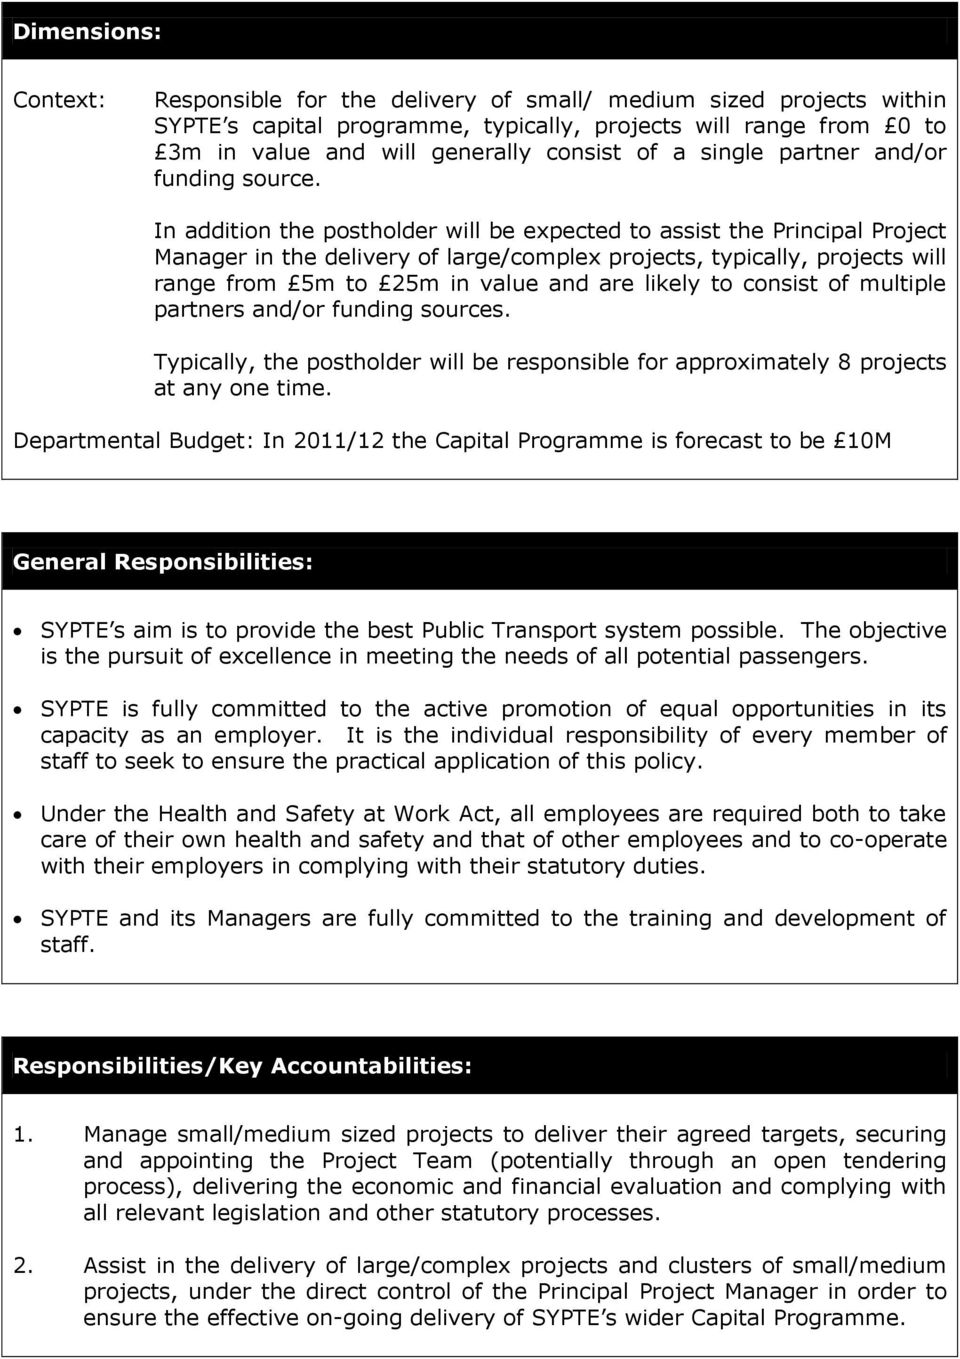 In addition the postholder will be expected to assist the Principal Project Manager in the delivery of large/complex projects, typically, projects will range from 5m to 25m in value and are likely to